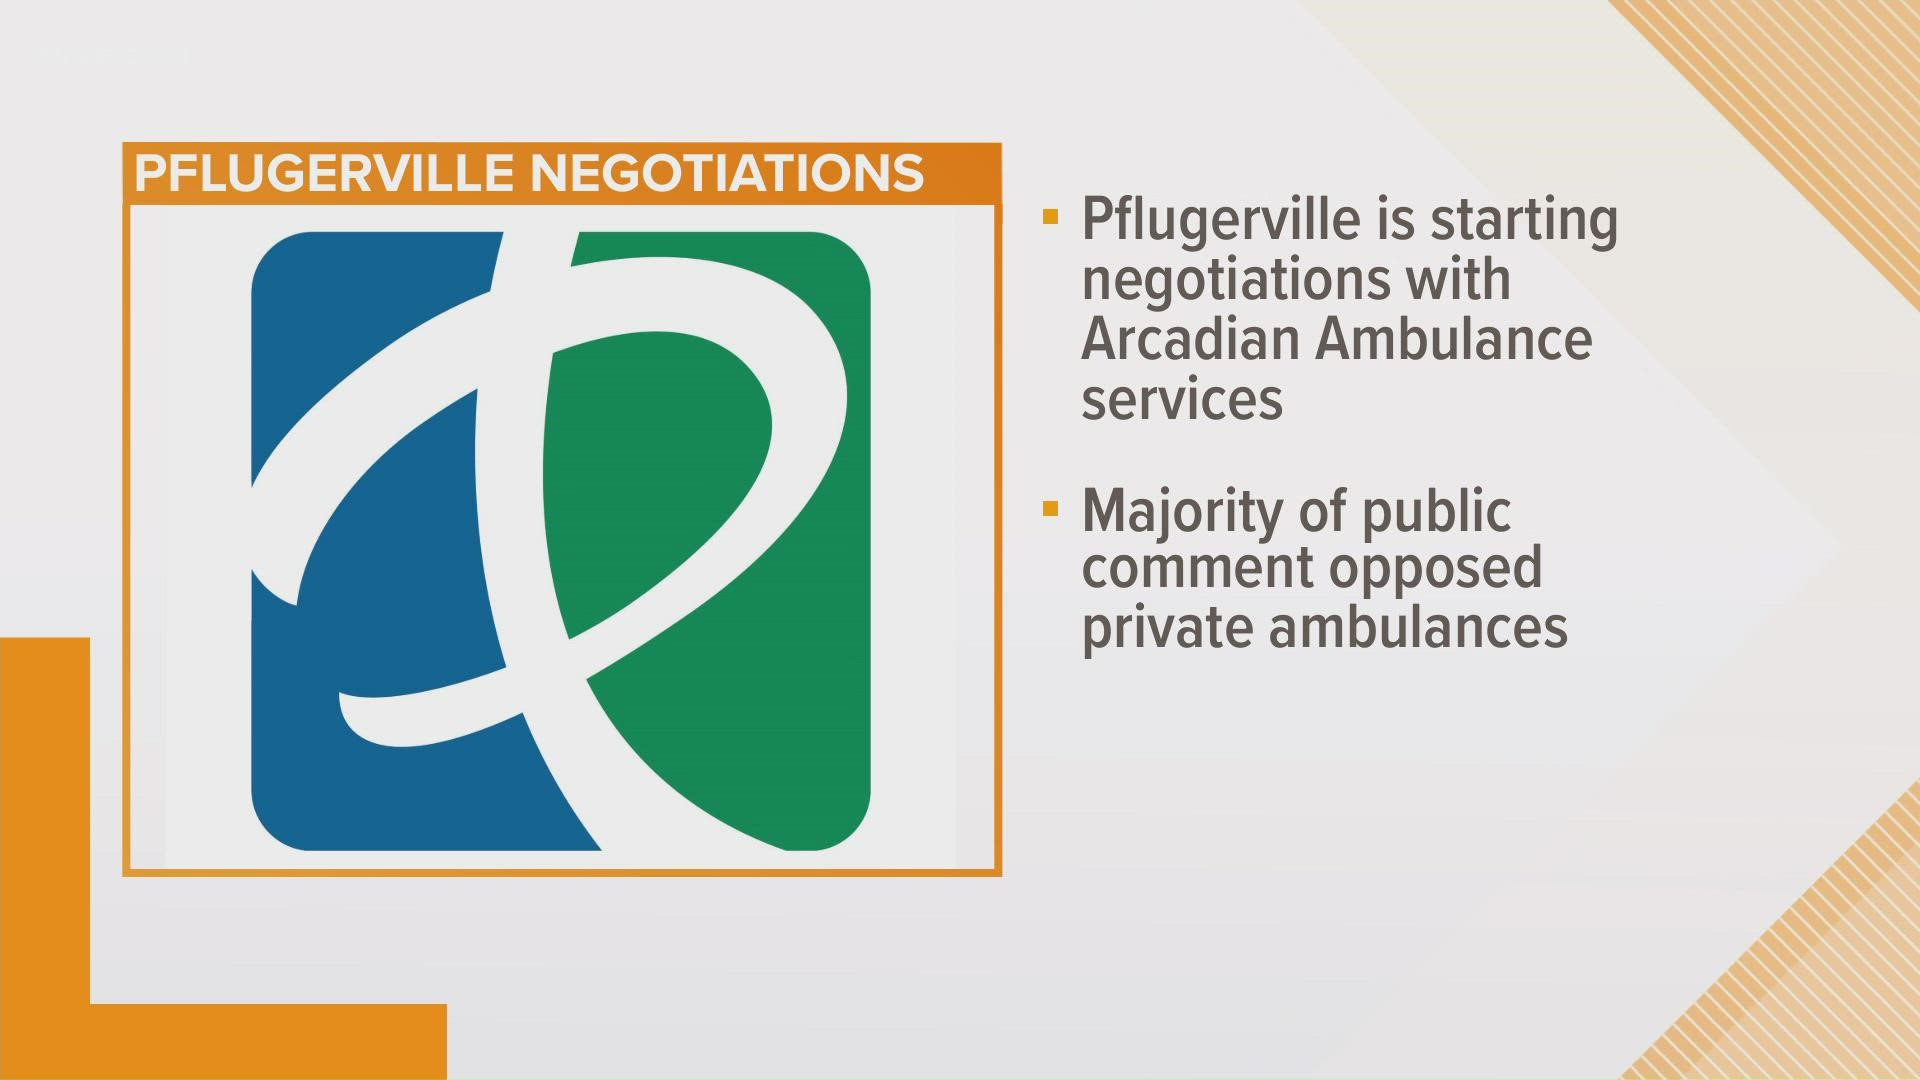 Pflugerville officials are starting negotiations with a private ambulance service despite public pushback.